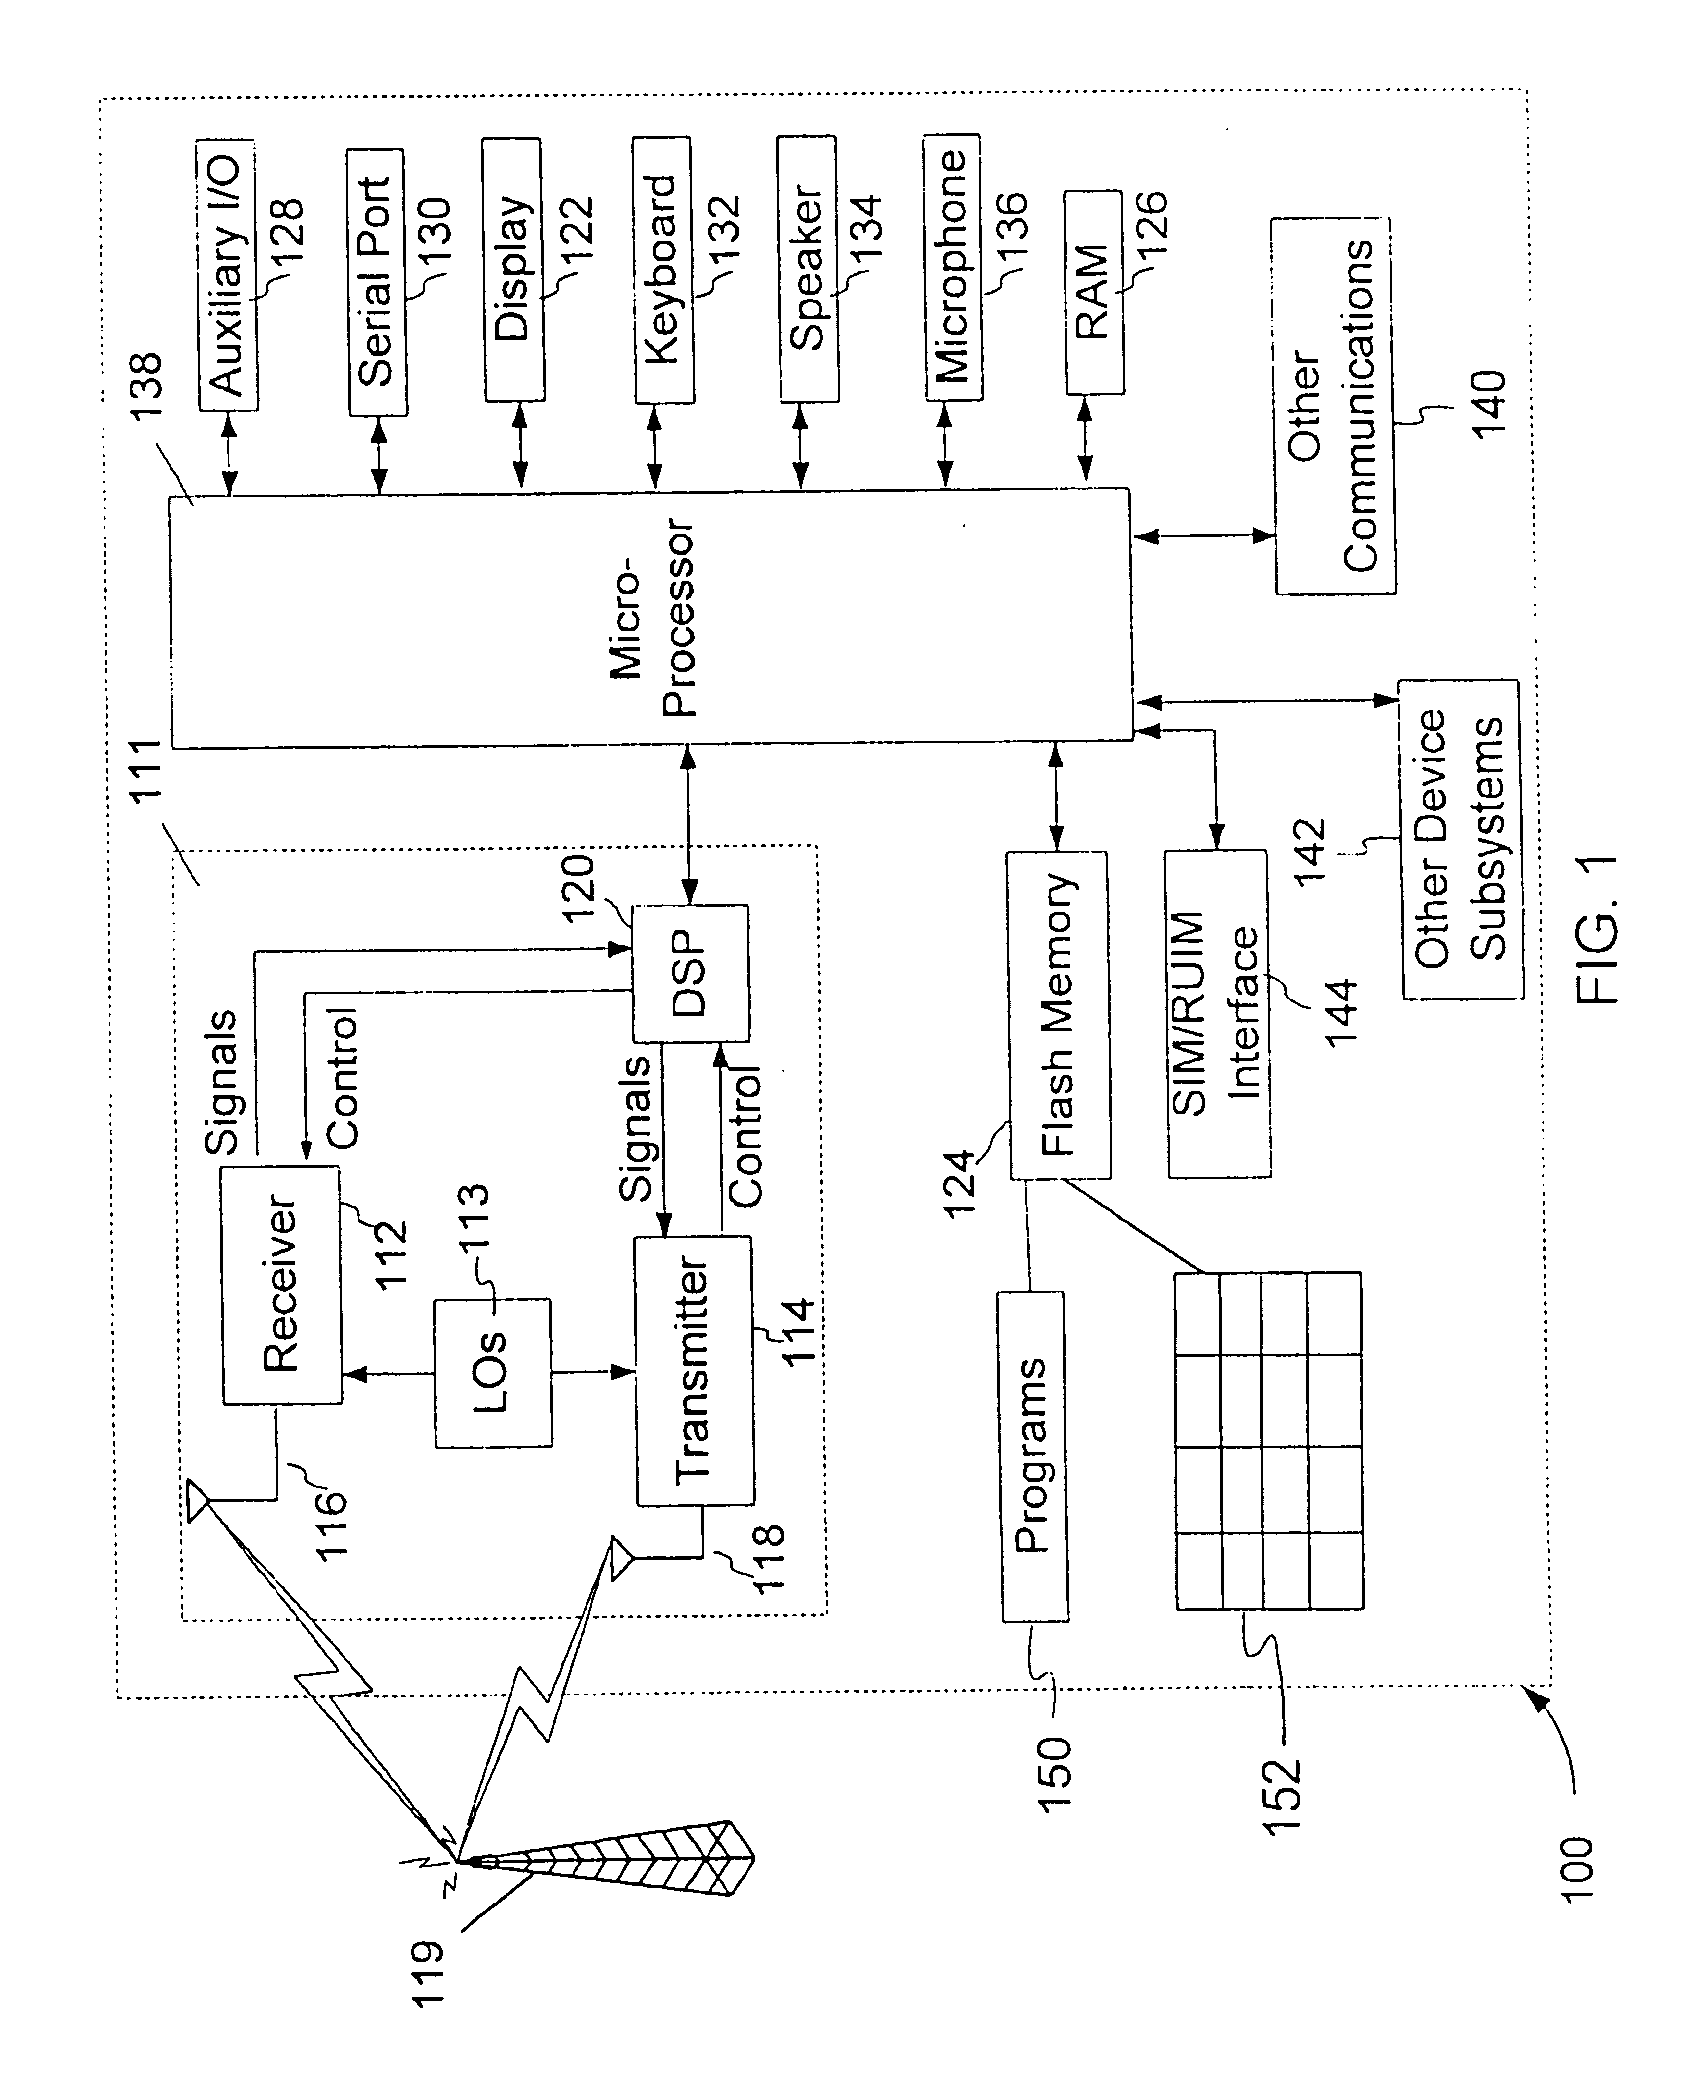 Method and system for supporting network 3G data capability information in a CDMA network